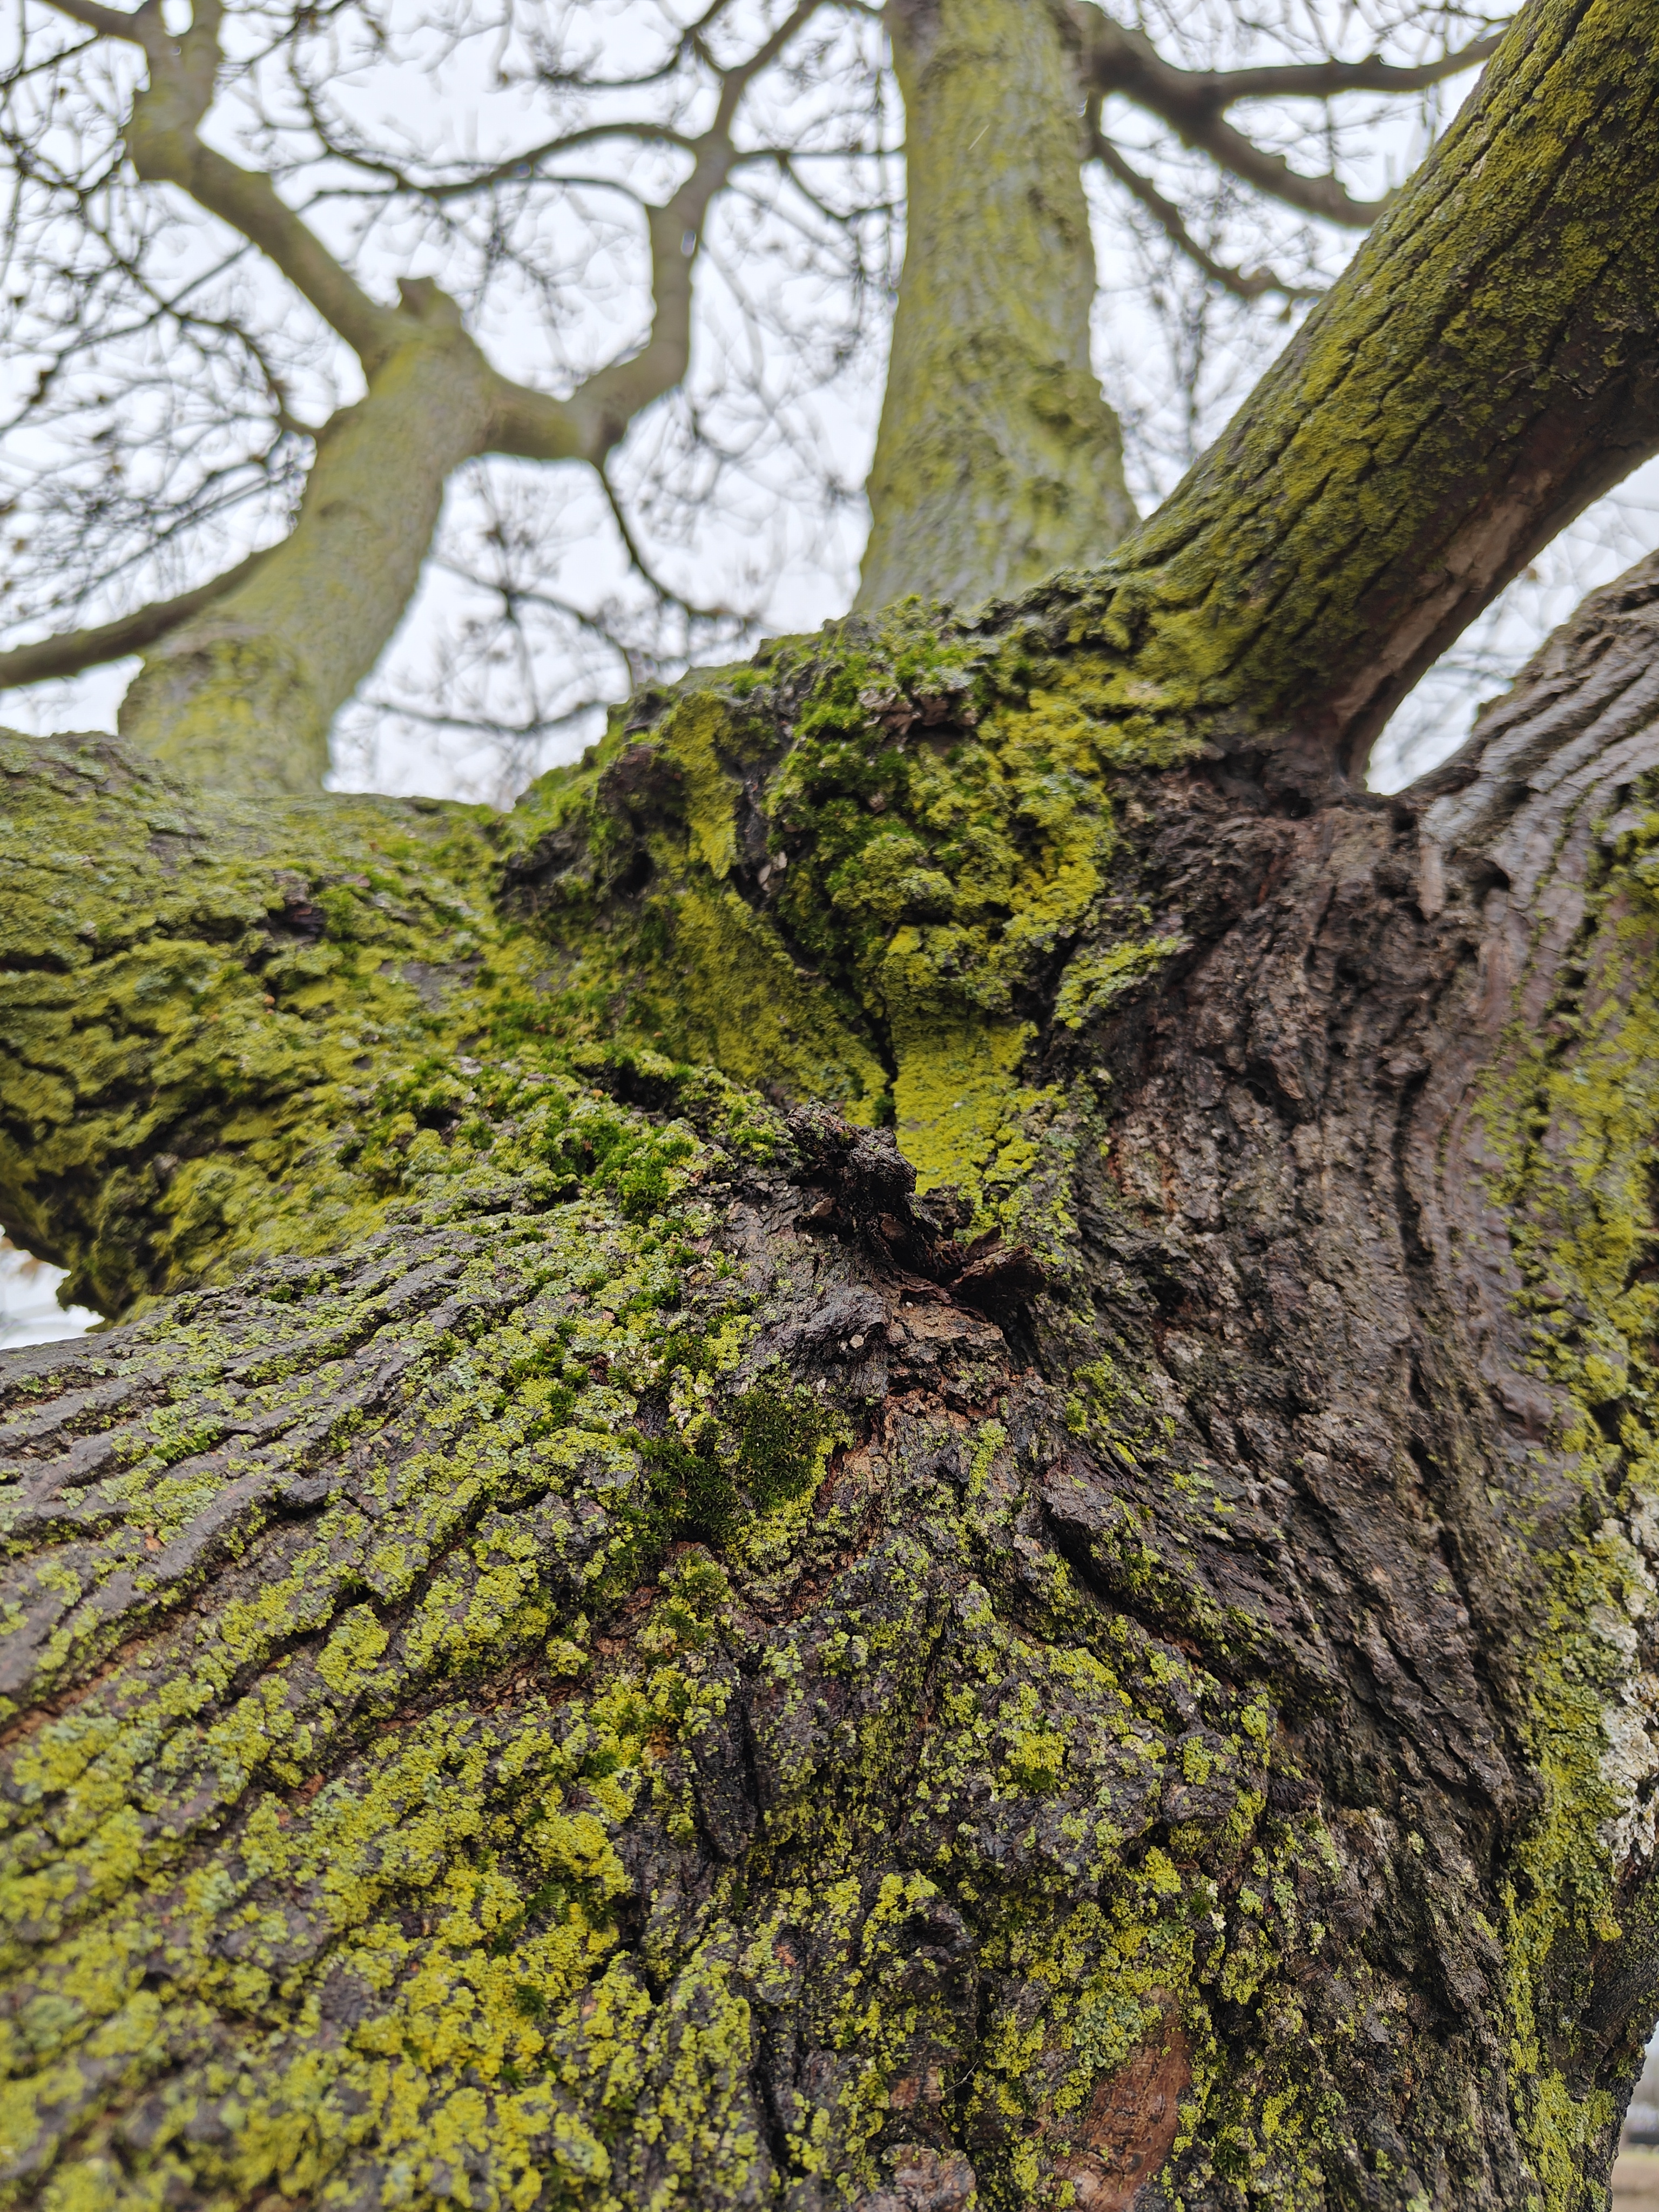 Photo of a large tree with green moss growing on it.